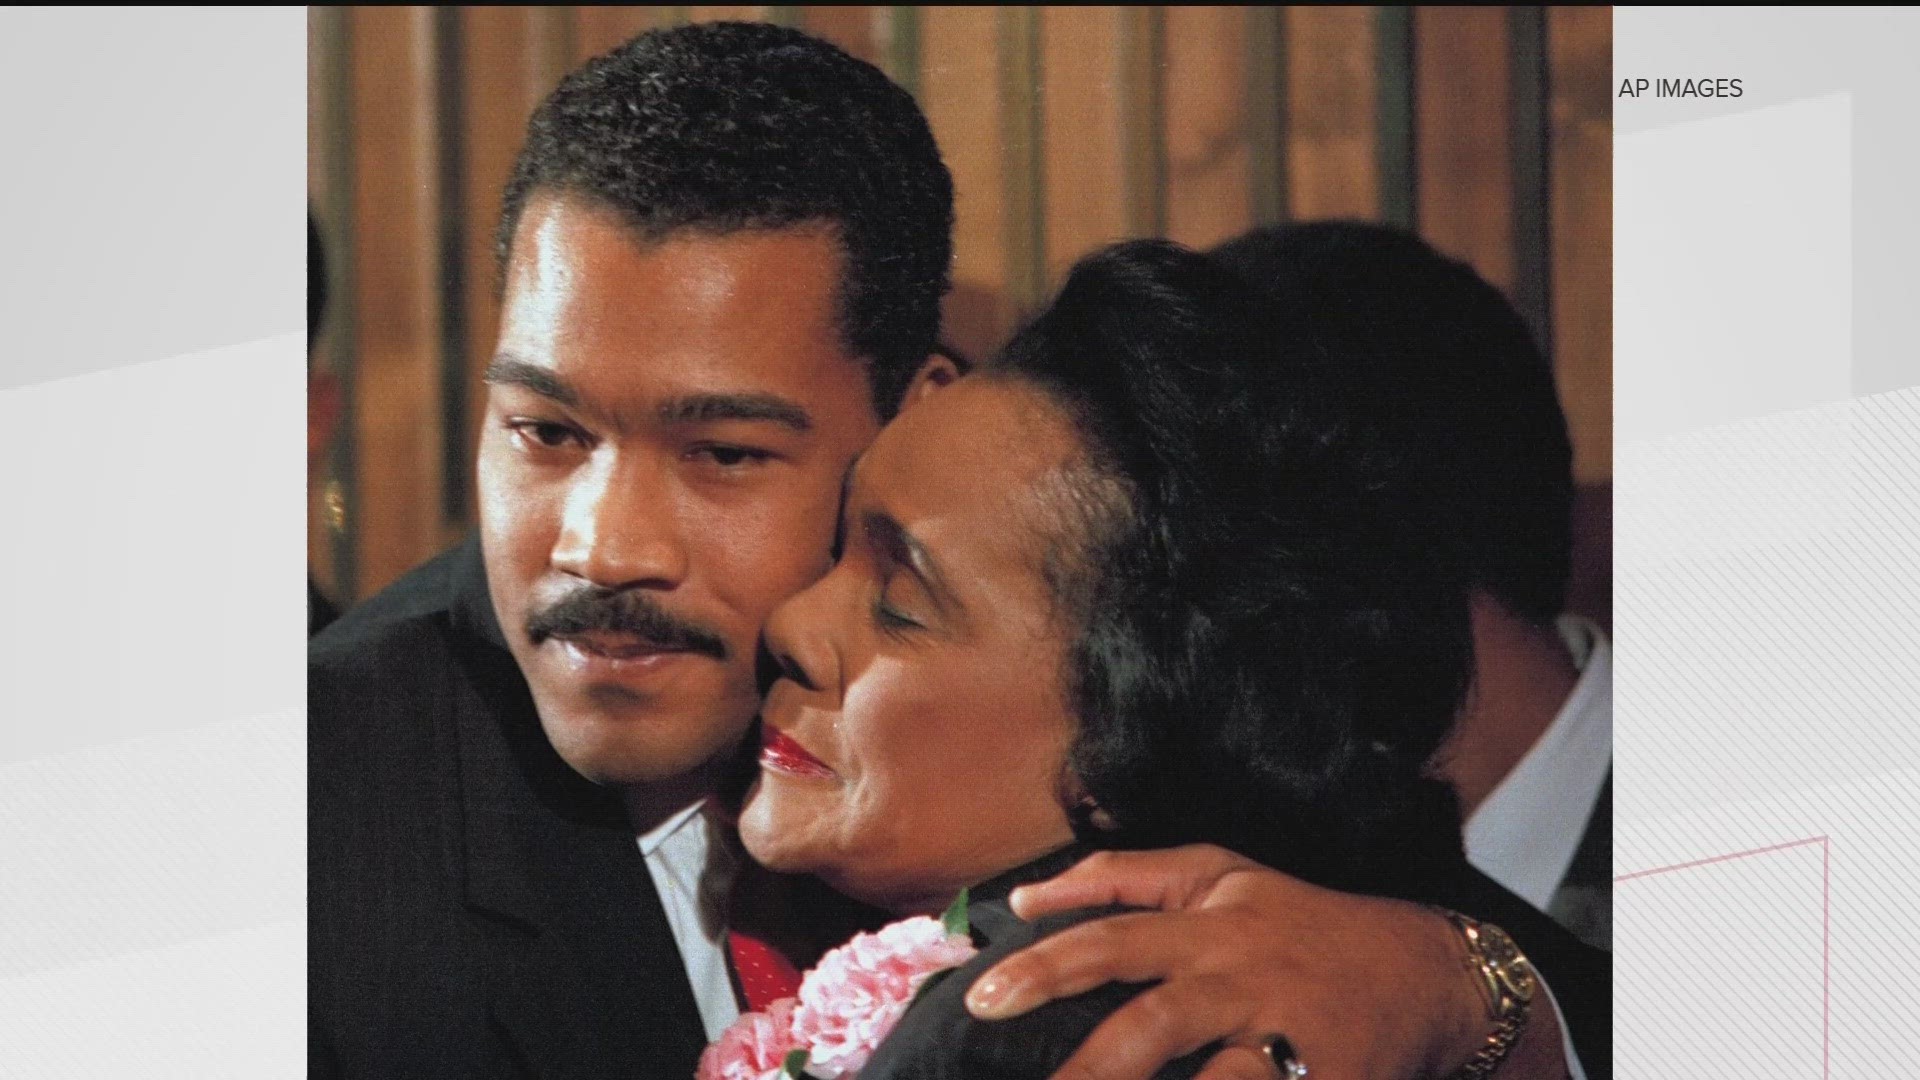 Dexter Scott King was the son of Martin Luther King Jr. and Coretta Scott King